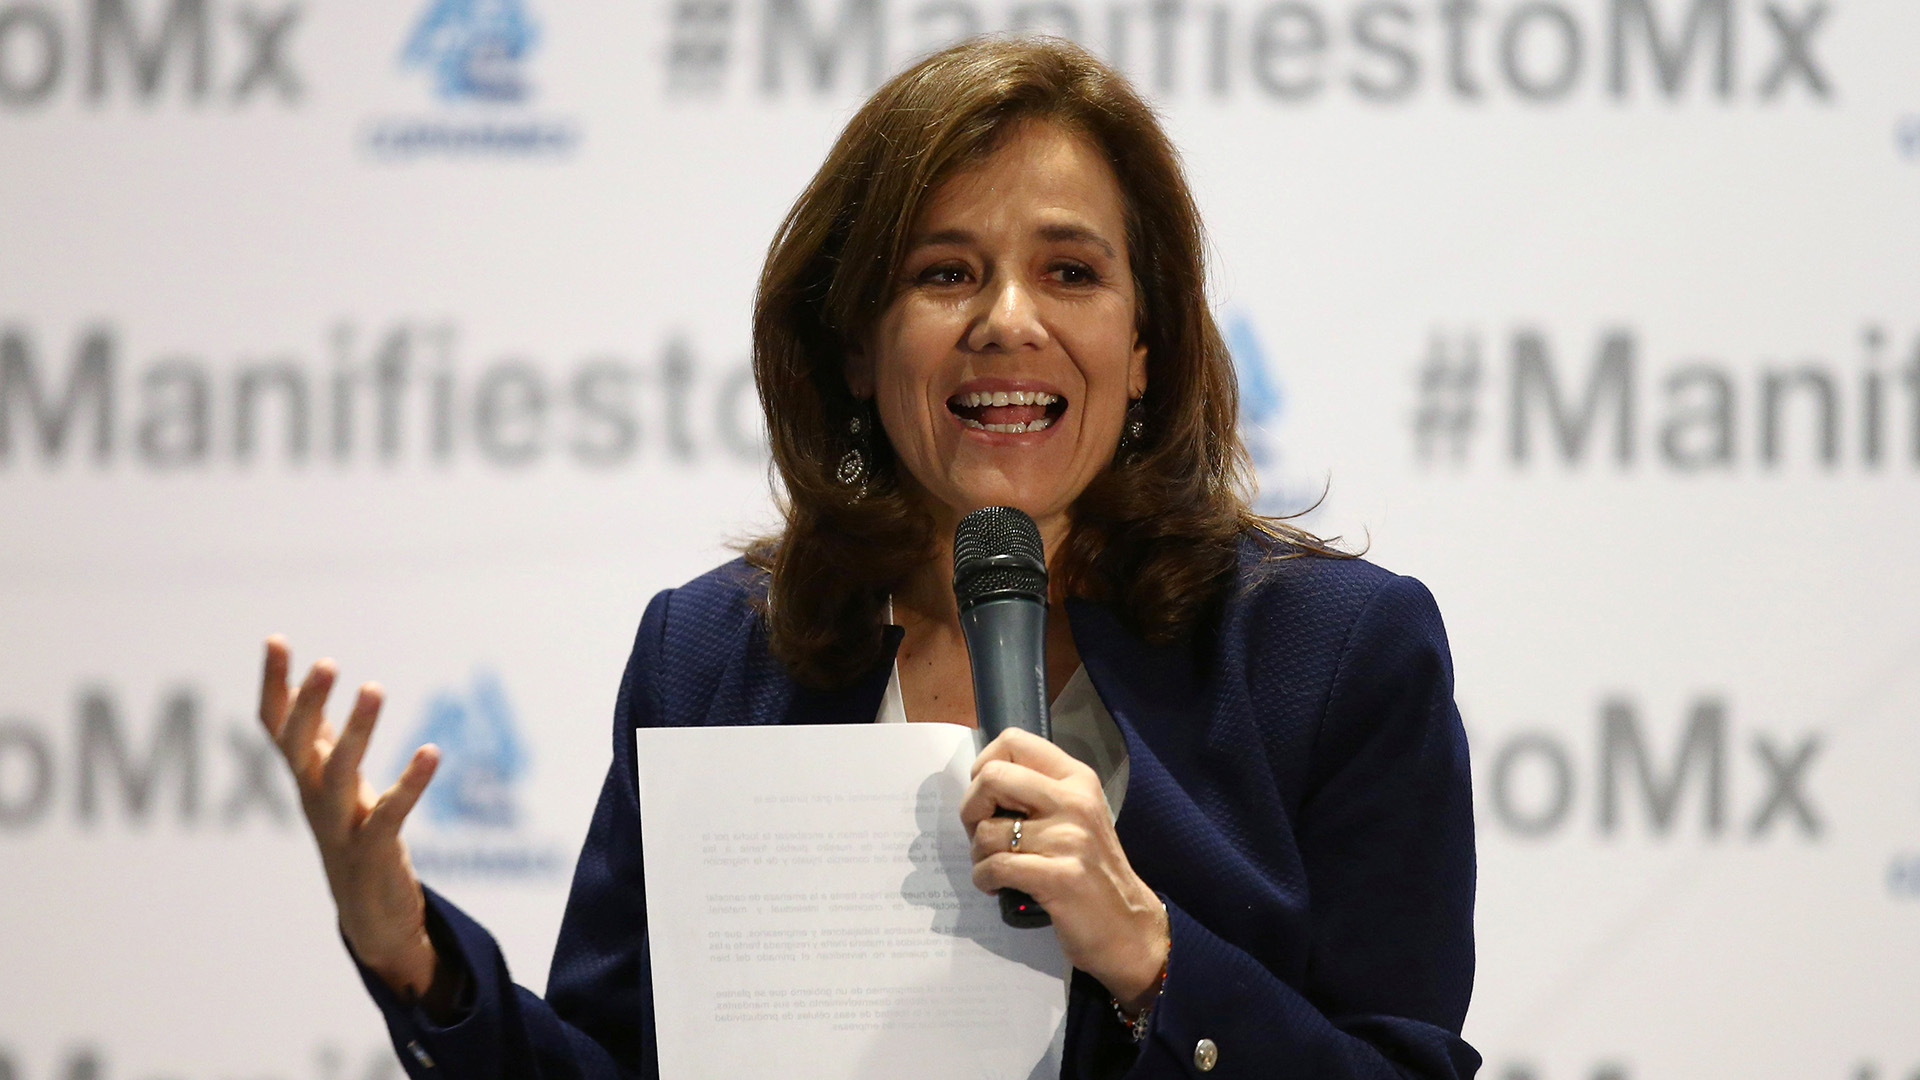 Margarita Zavala against being told to disappear pharmacy offices (Photo: REUTERS/Edgard Garrido)